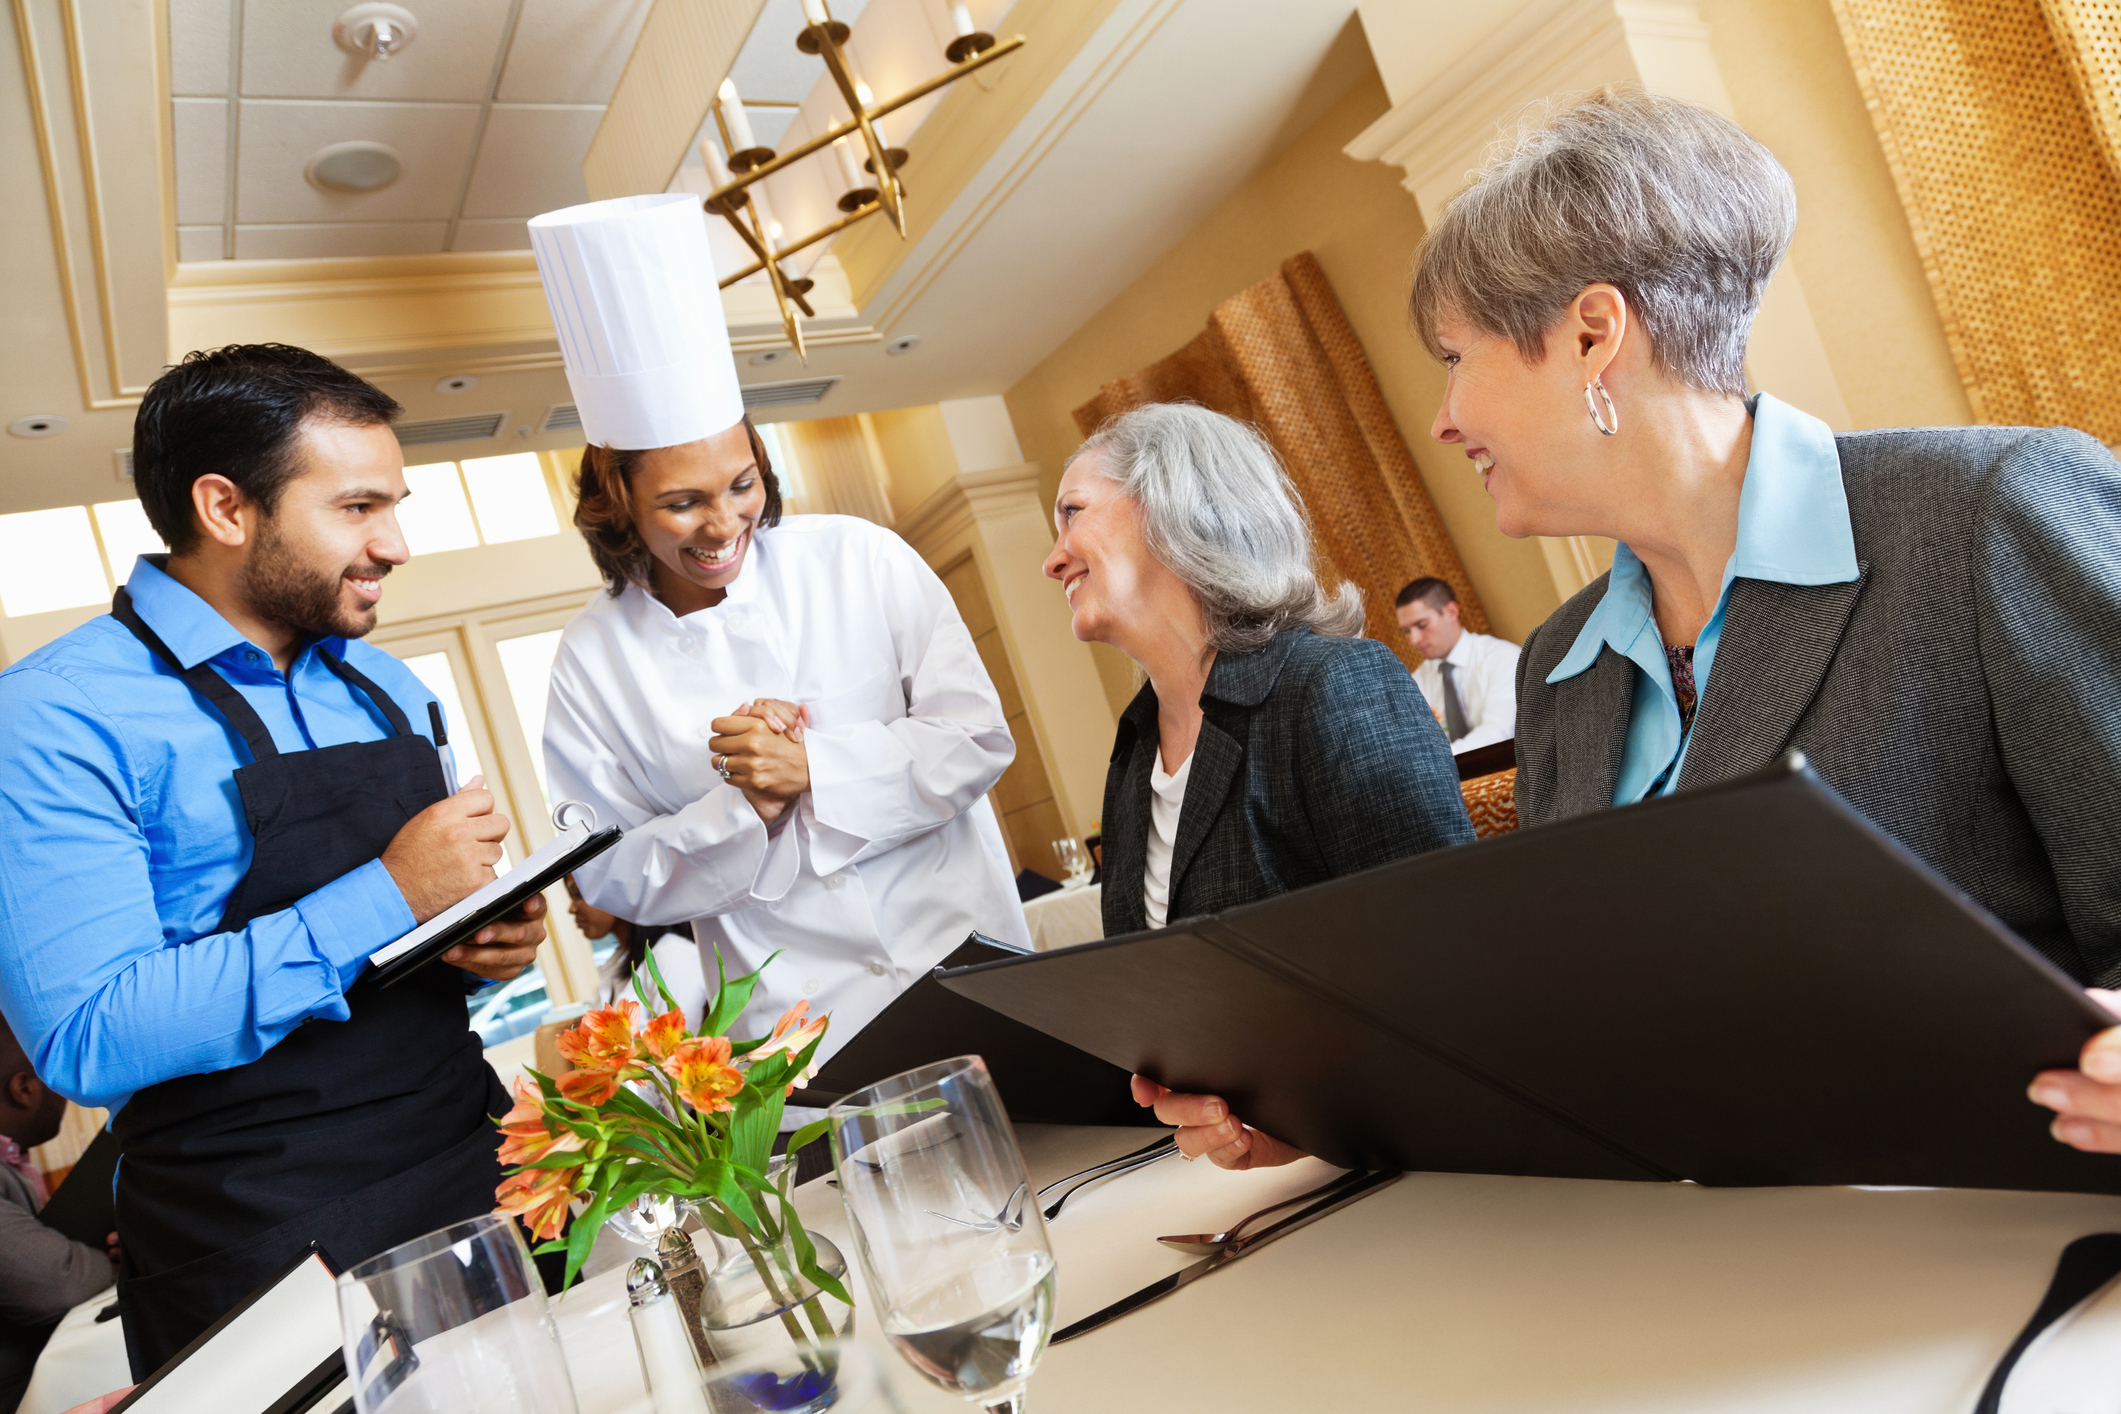 Restaurant chef and waiter helping customers with menu food questions